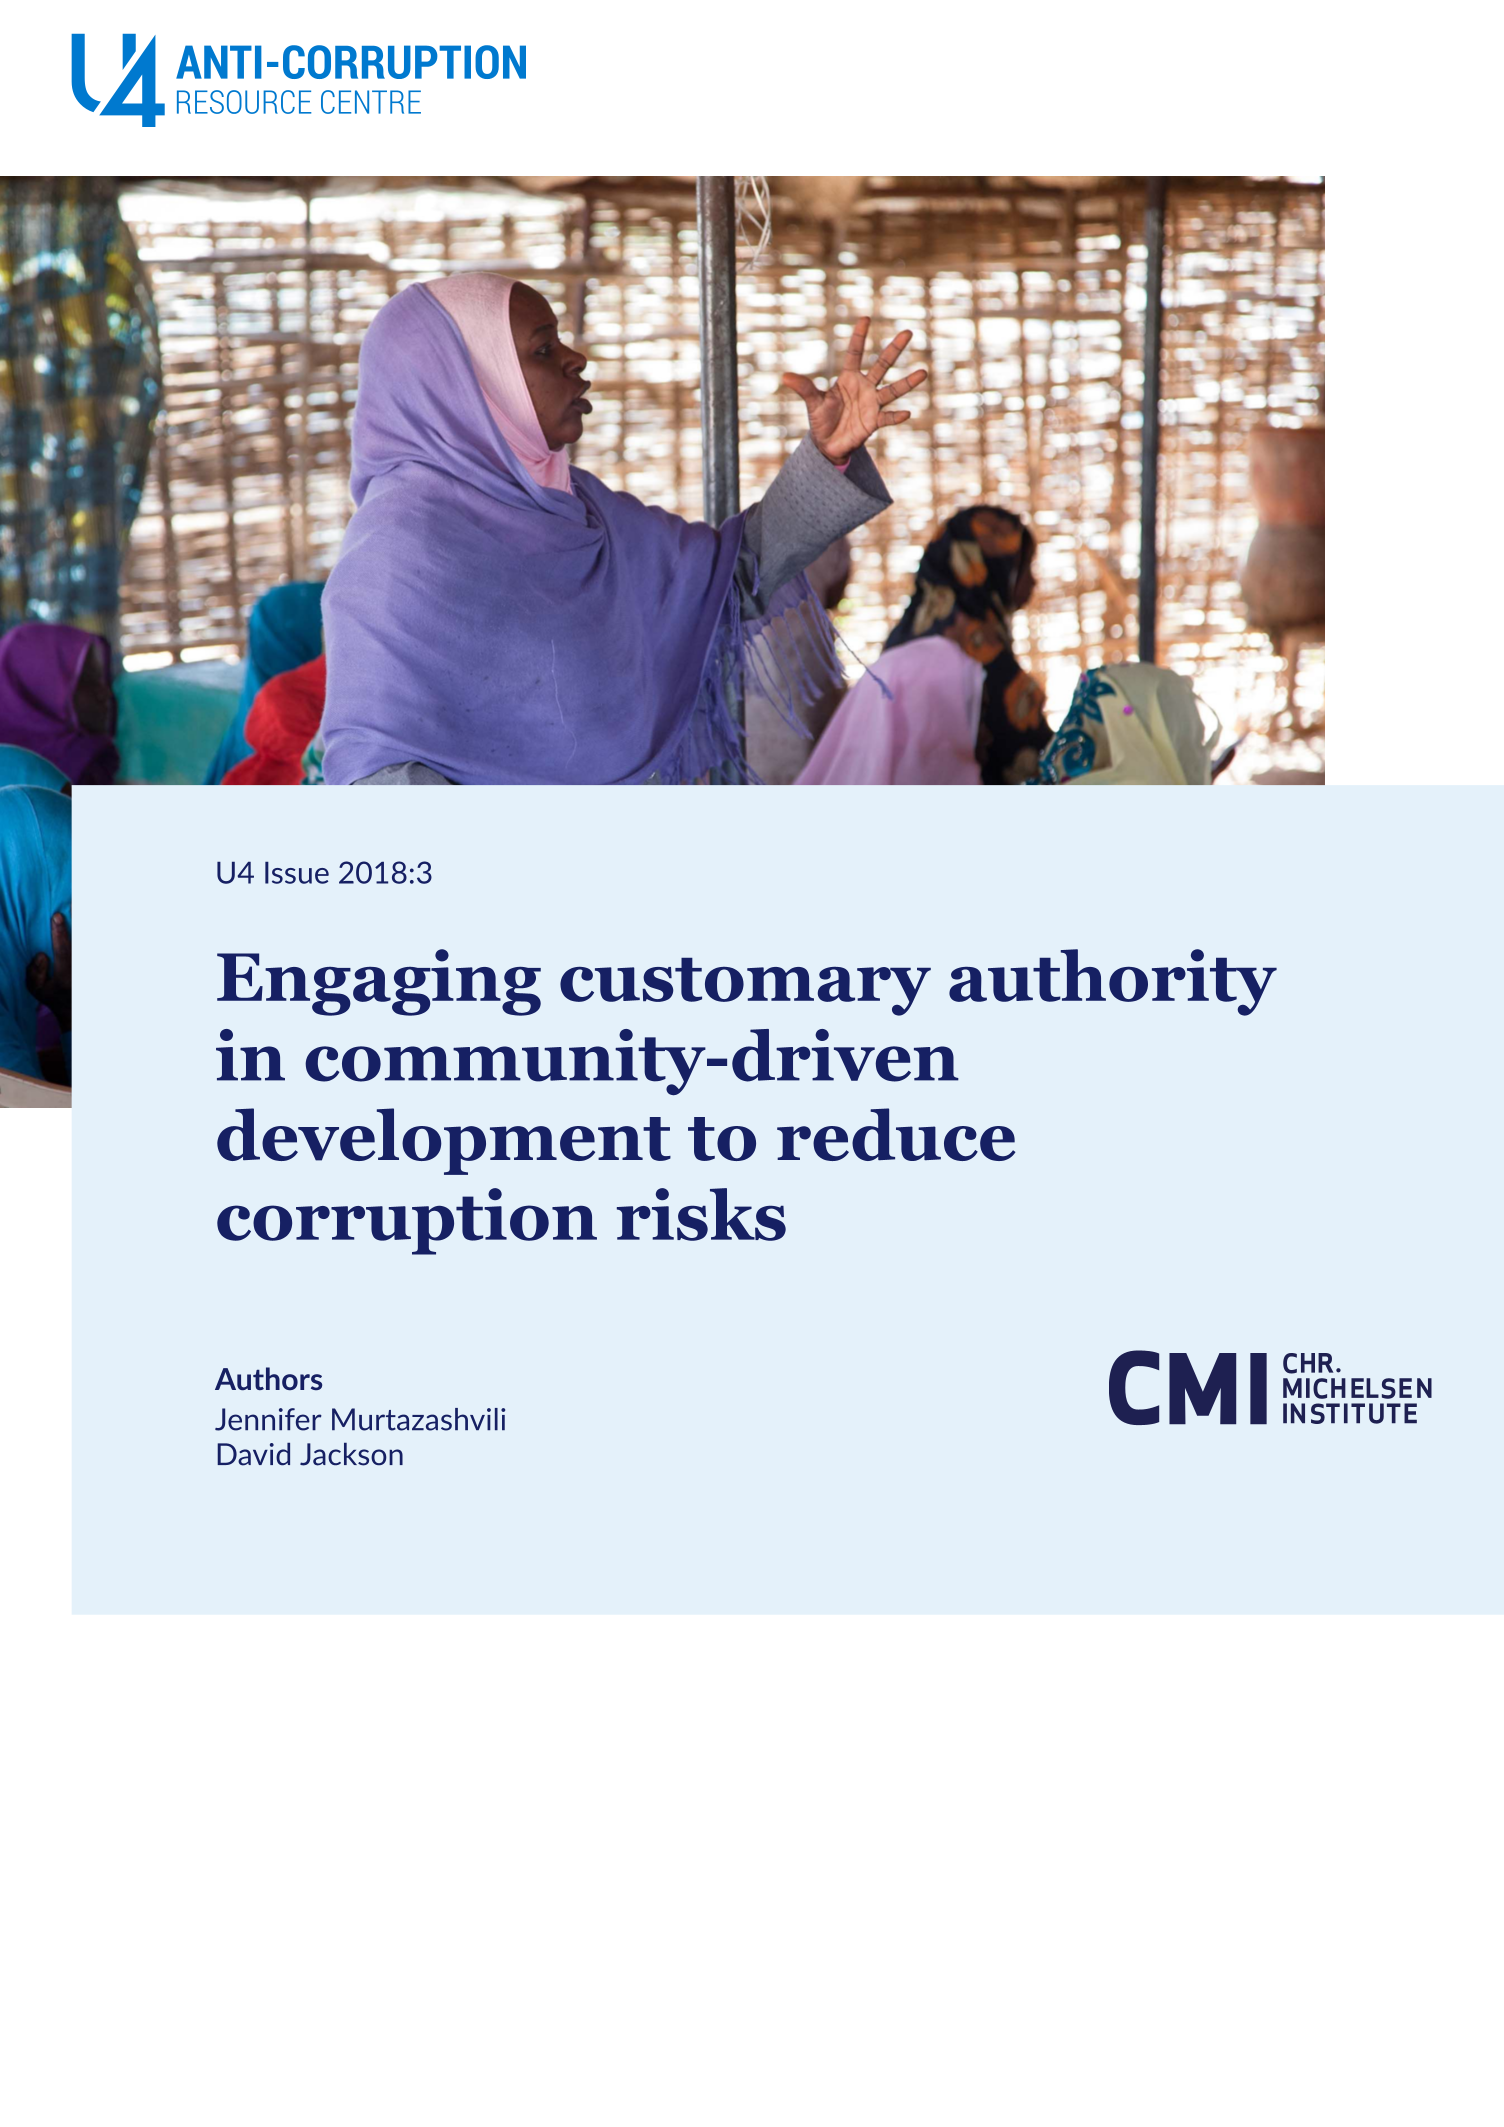 Engaging customary authority in community-driven development to reduce corruption risks